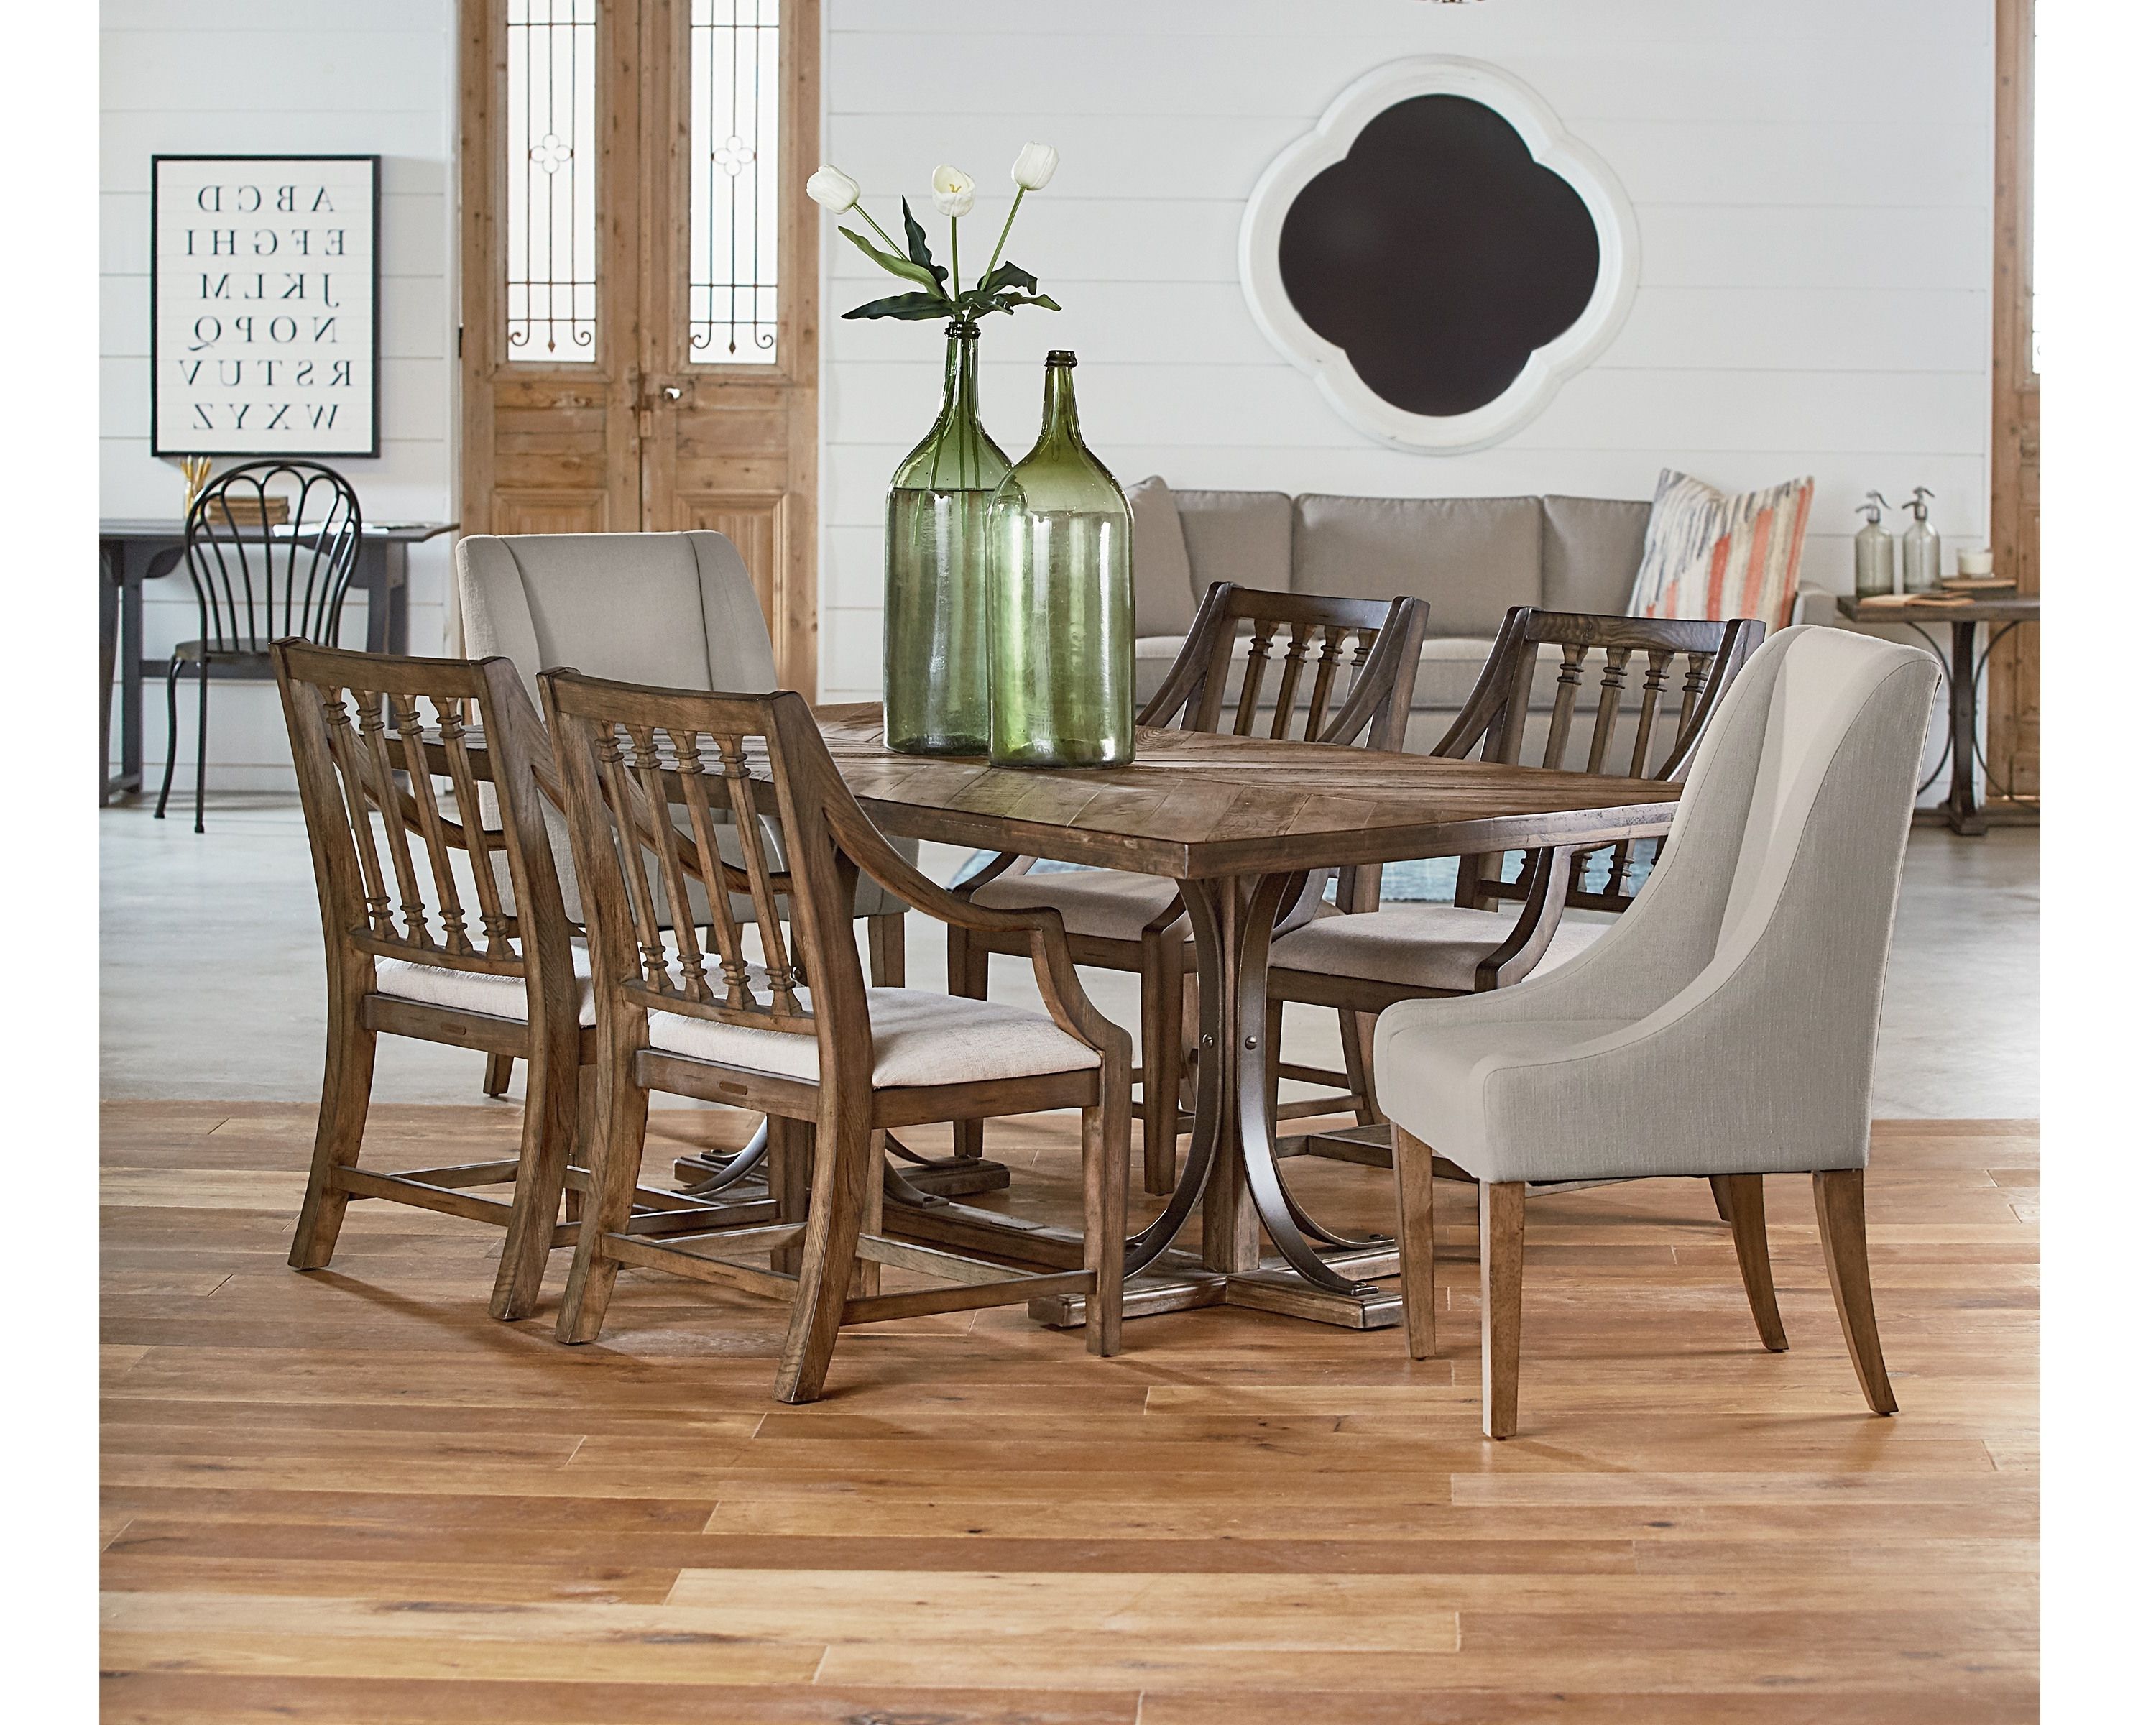 Magnolia Home Shop Floor Dining Tables With Iron Trestle Inside Newest Iron Trestle + Revival – Magnolia Home (View 1 of 25)